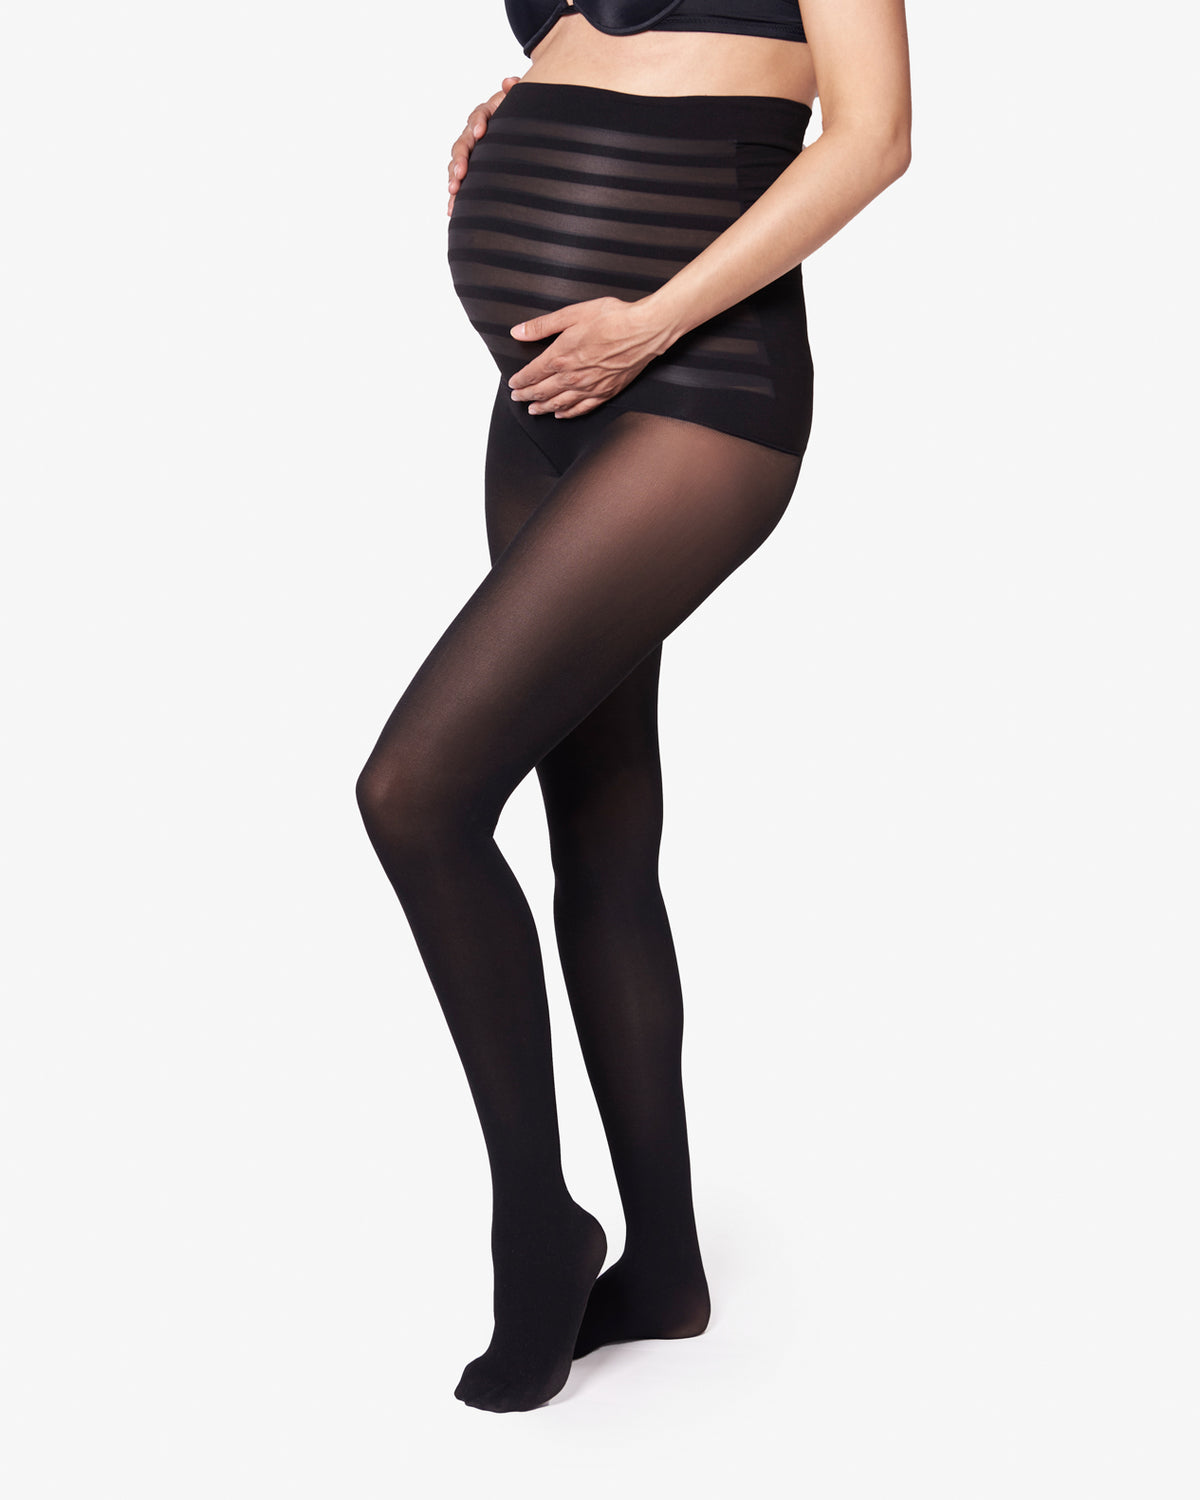 MUGLER X WOLFORD TIGHTS REVIEW  Double Seamed?? Are they Worth